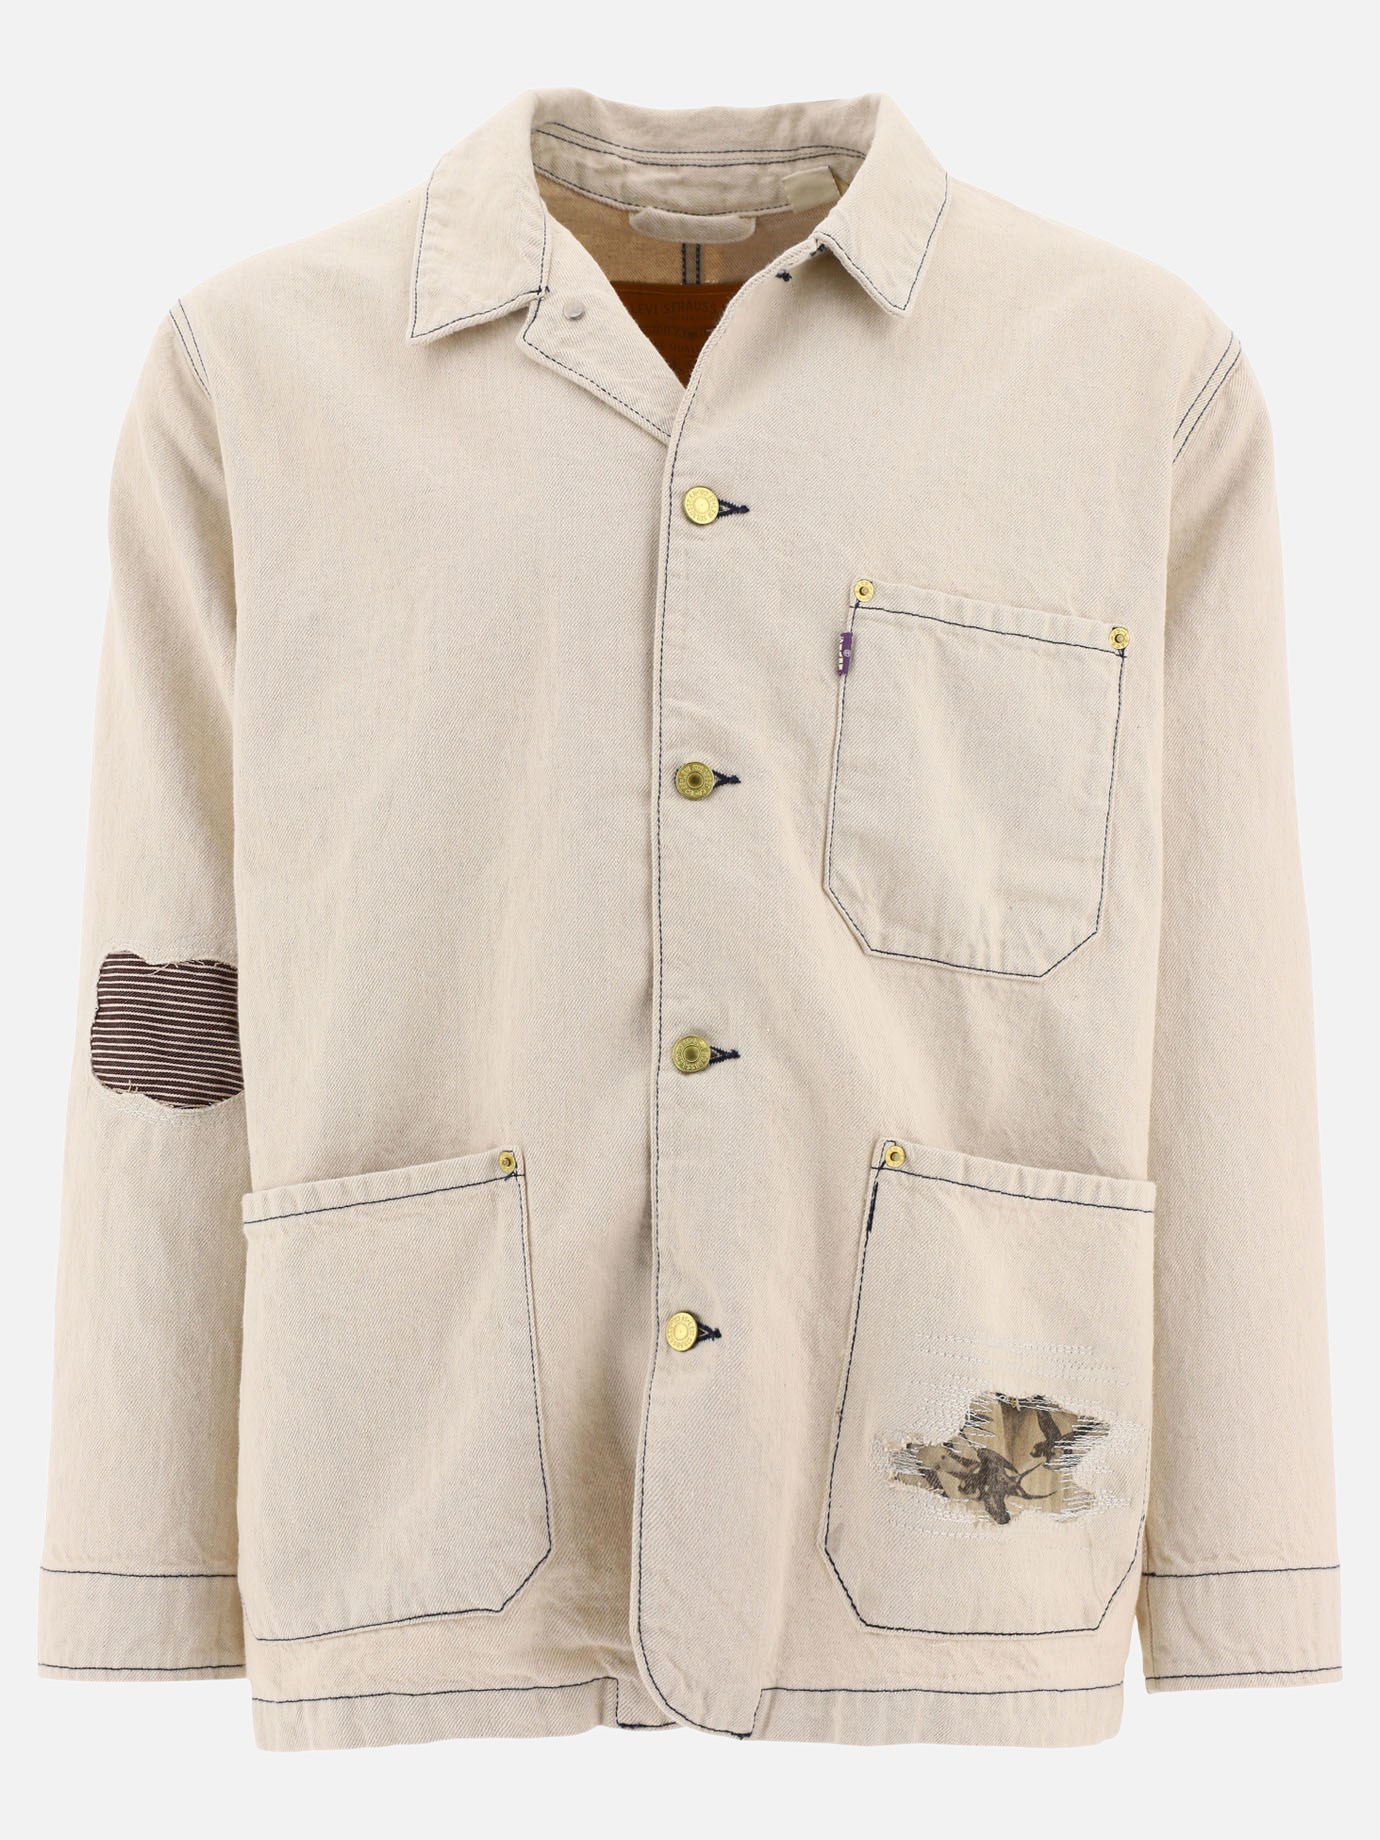 Giacca con patchworkby Levi's Vintage Clothing - 4